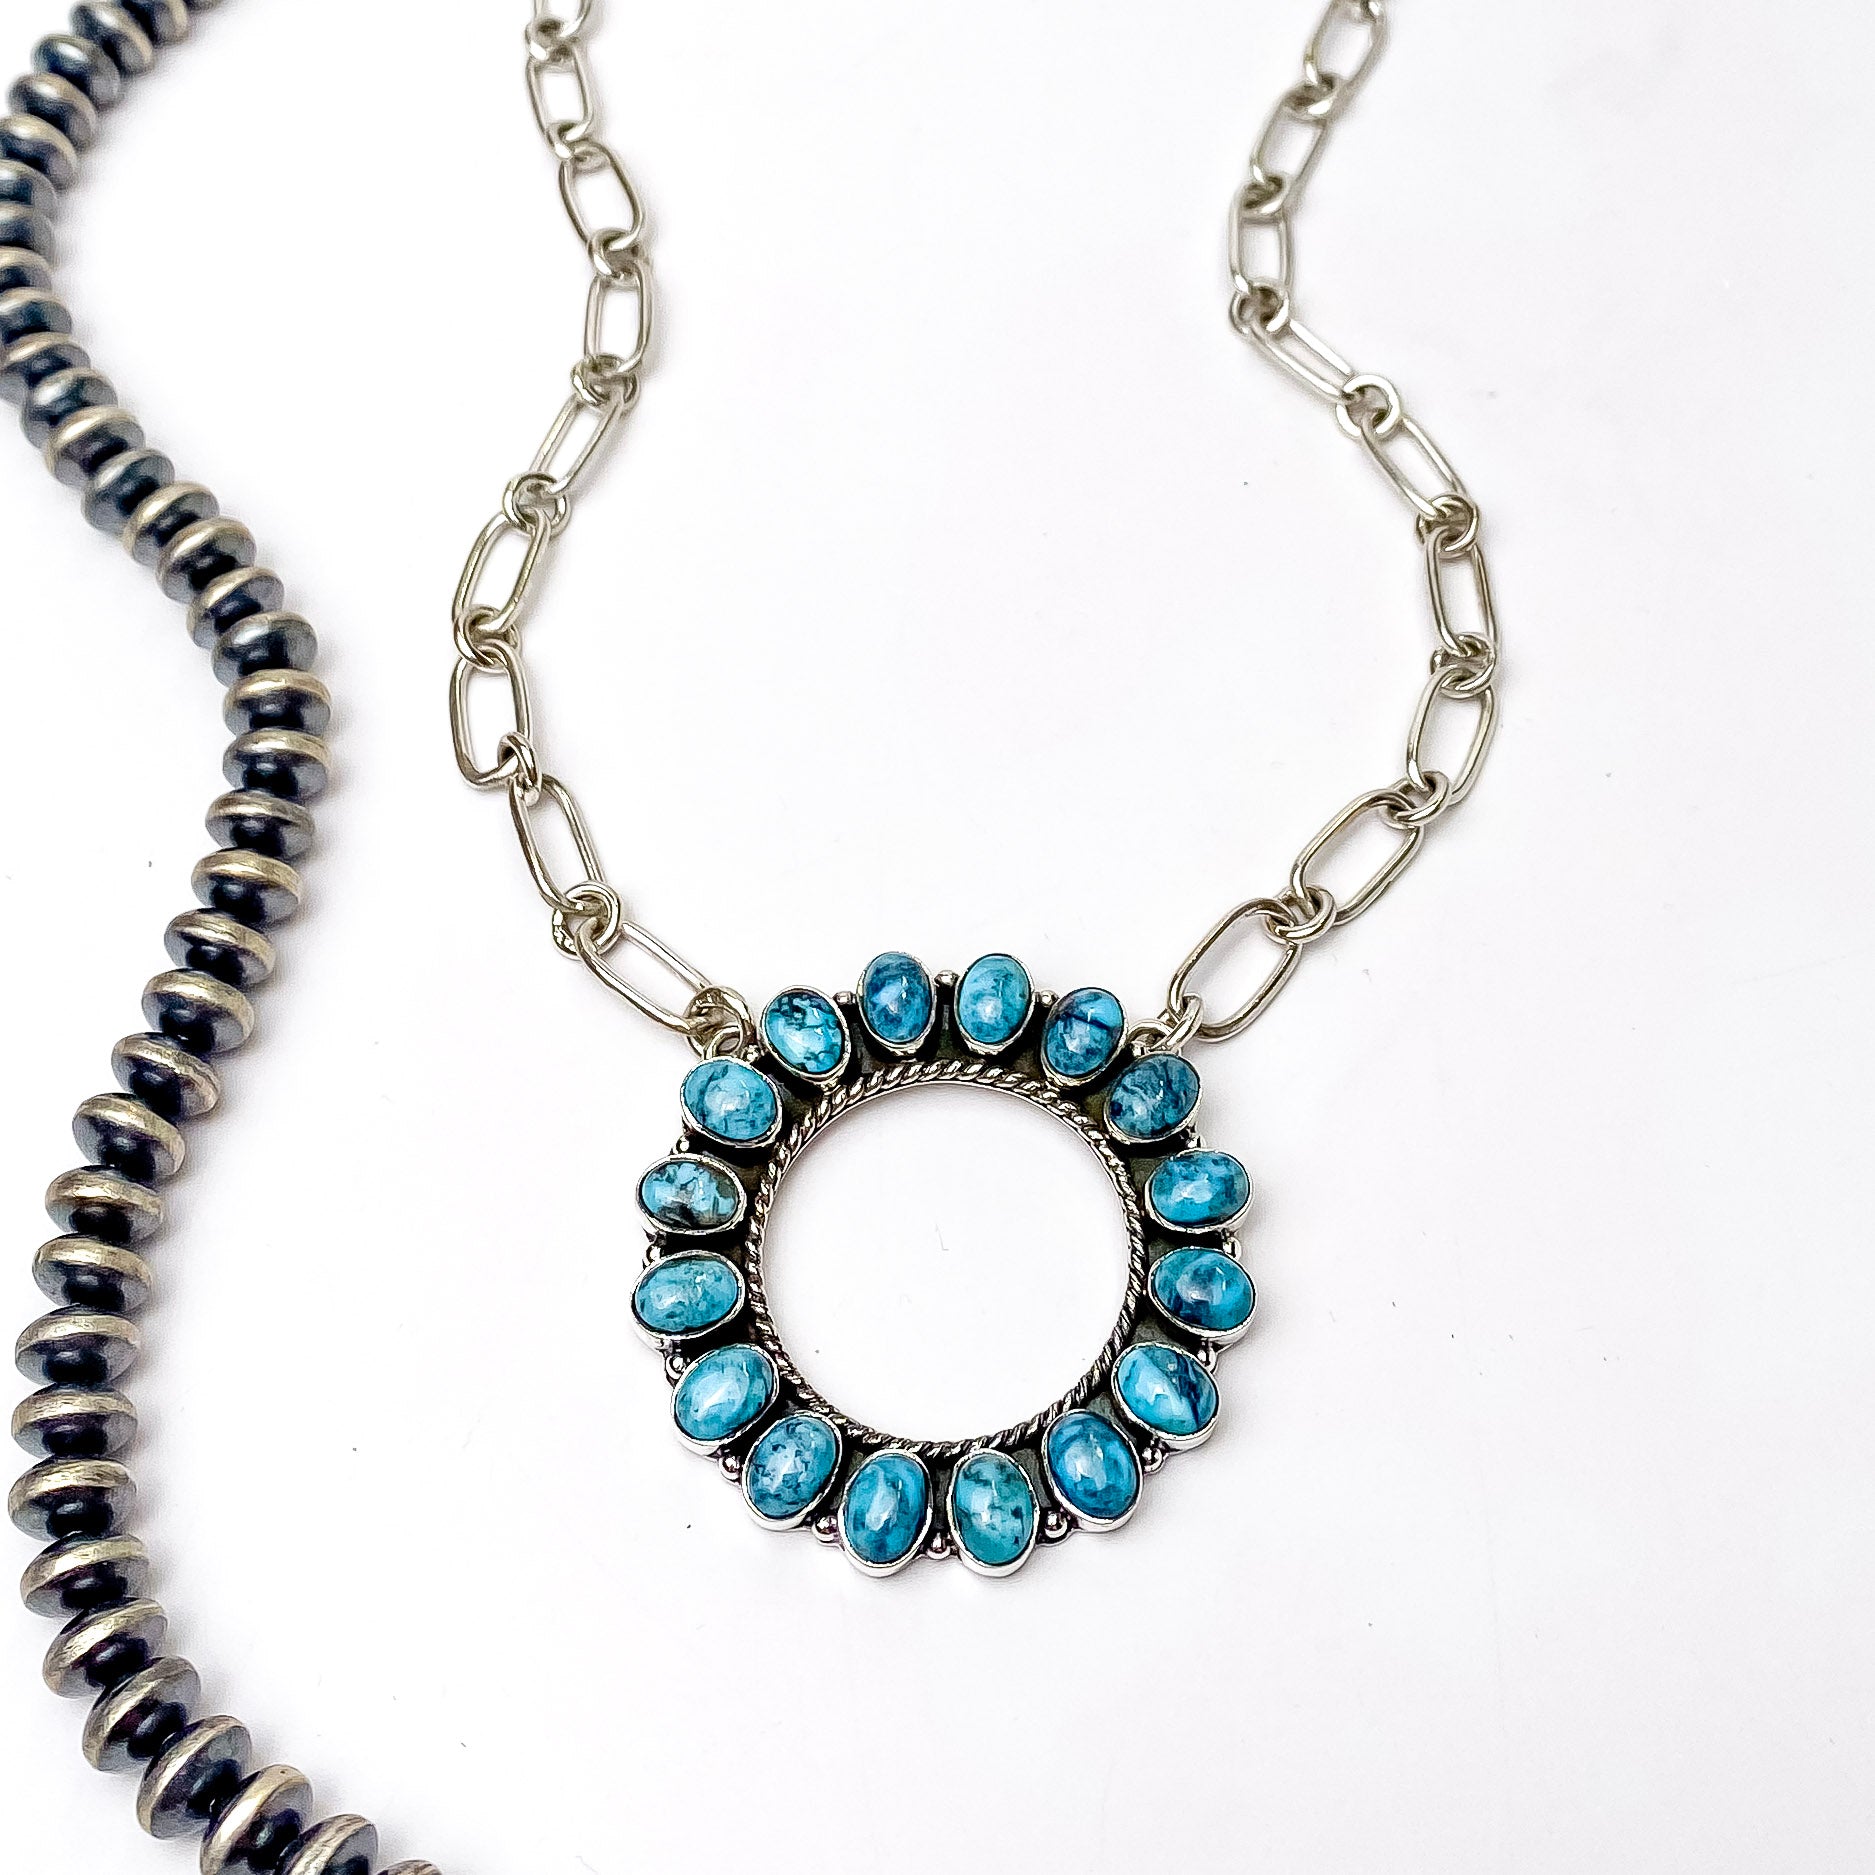 In the picture is a chain circle necklace in kingman turquoise with a white background